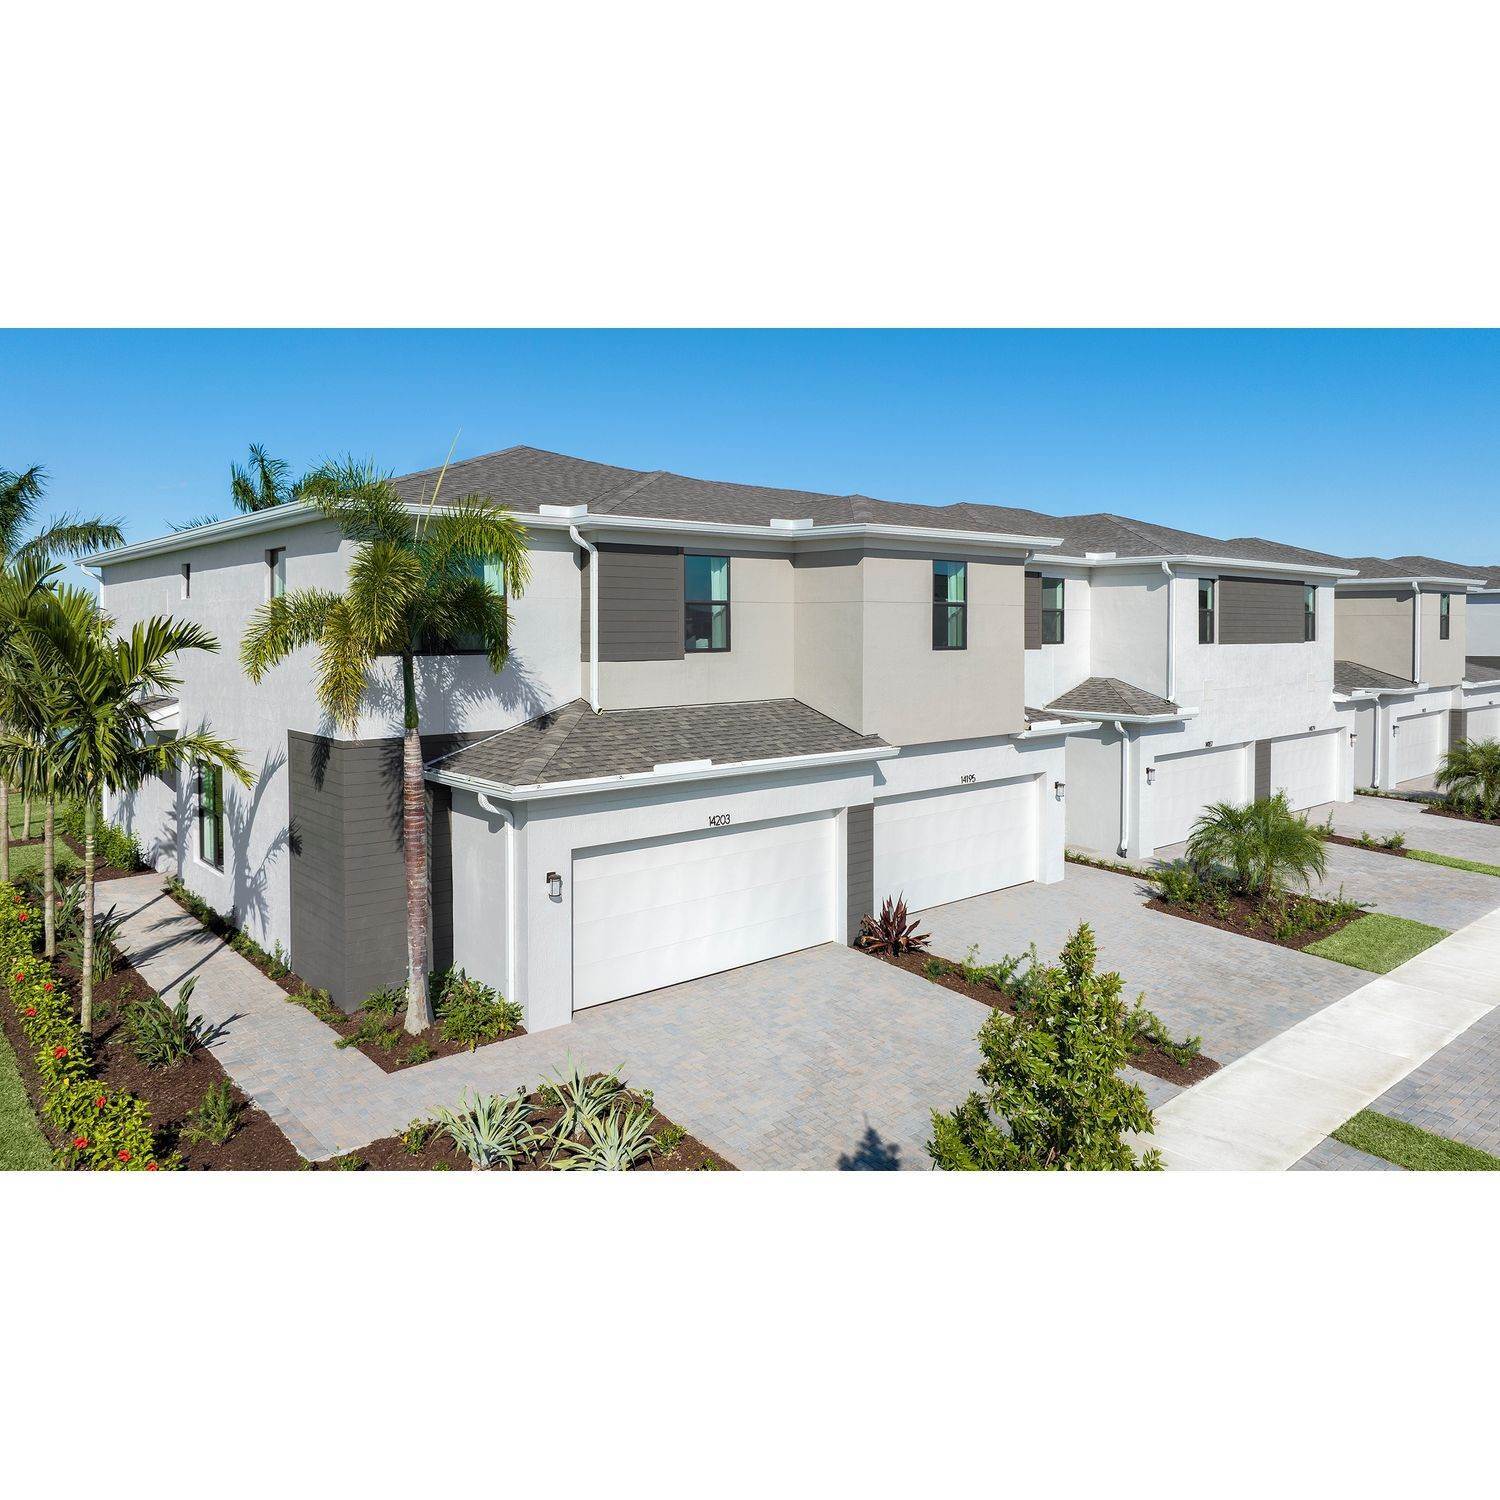 13. Tradition - Cadence - Townhomes xây dựng tại 10455 SW Orana Drive, Port St. Lucie, FL 34987